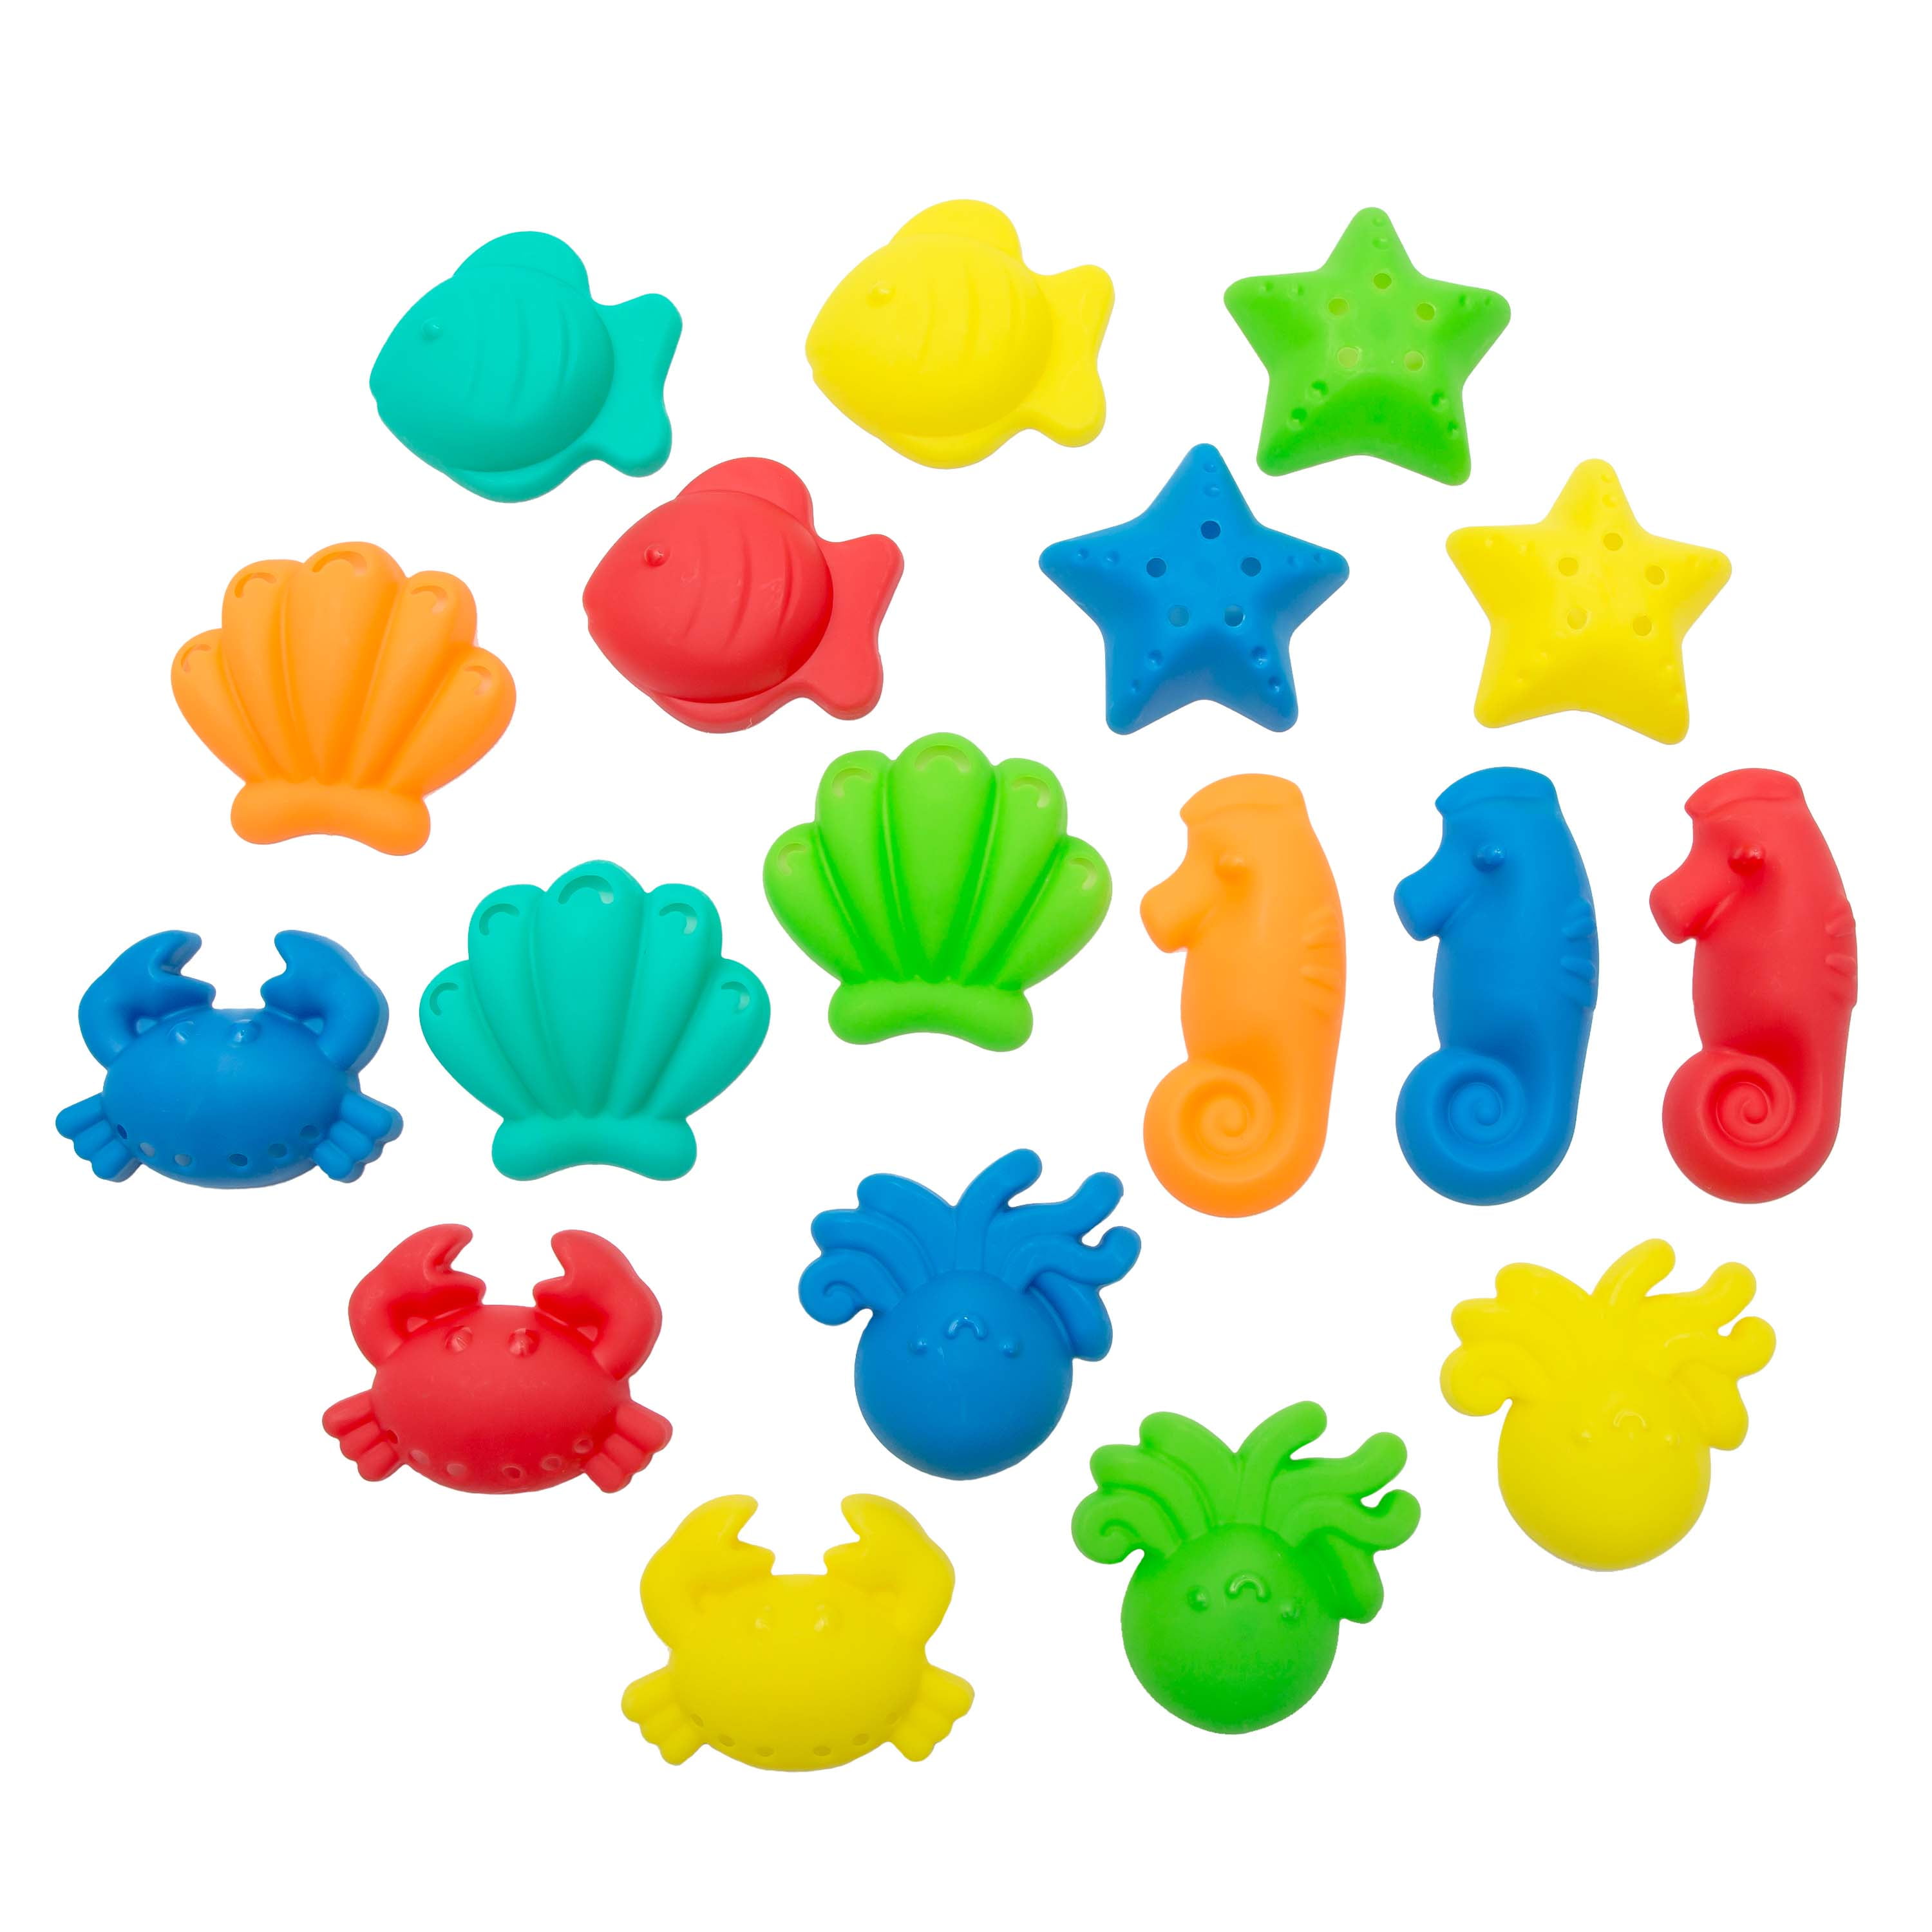 Lot of 12 Novelty Toy Assorted Color Neon Caterpillar Toy Animal Figures Q 